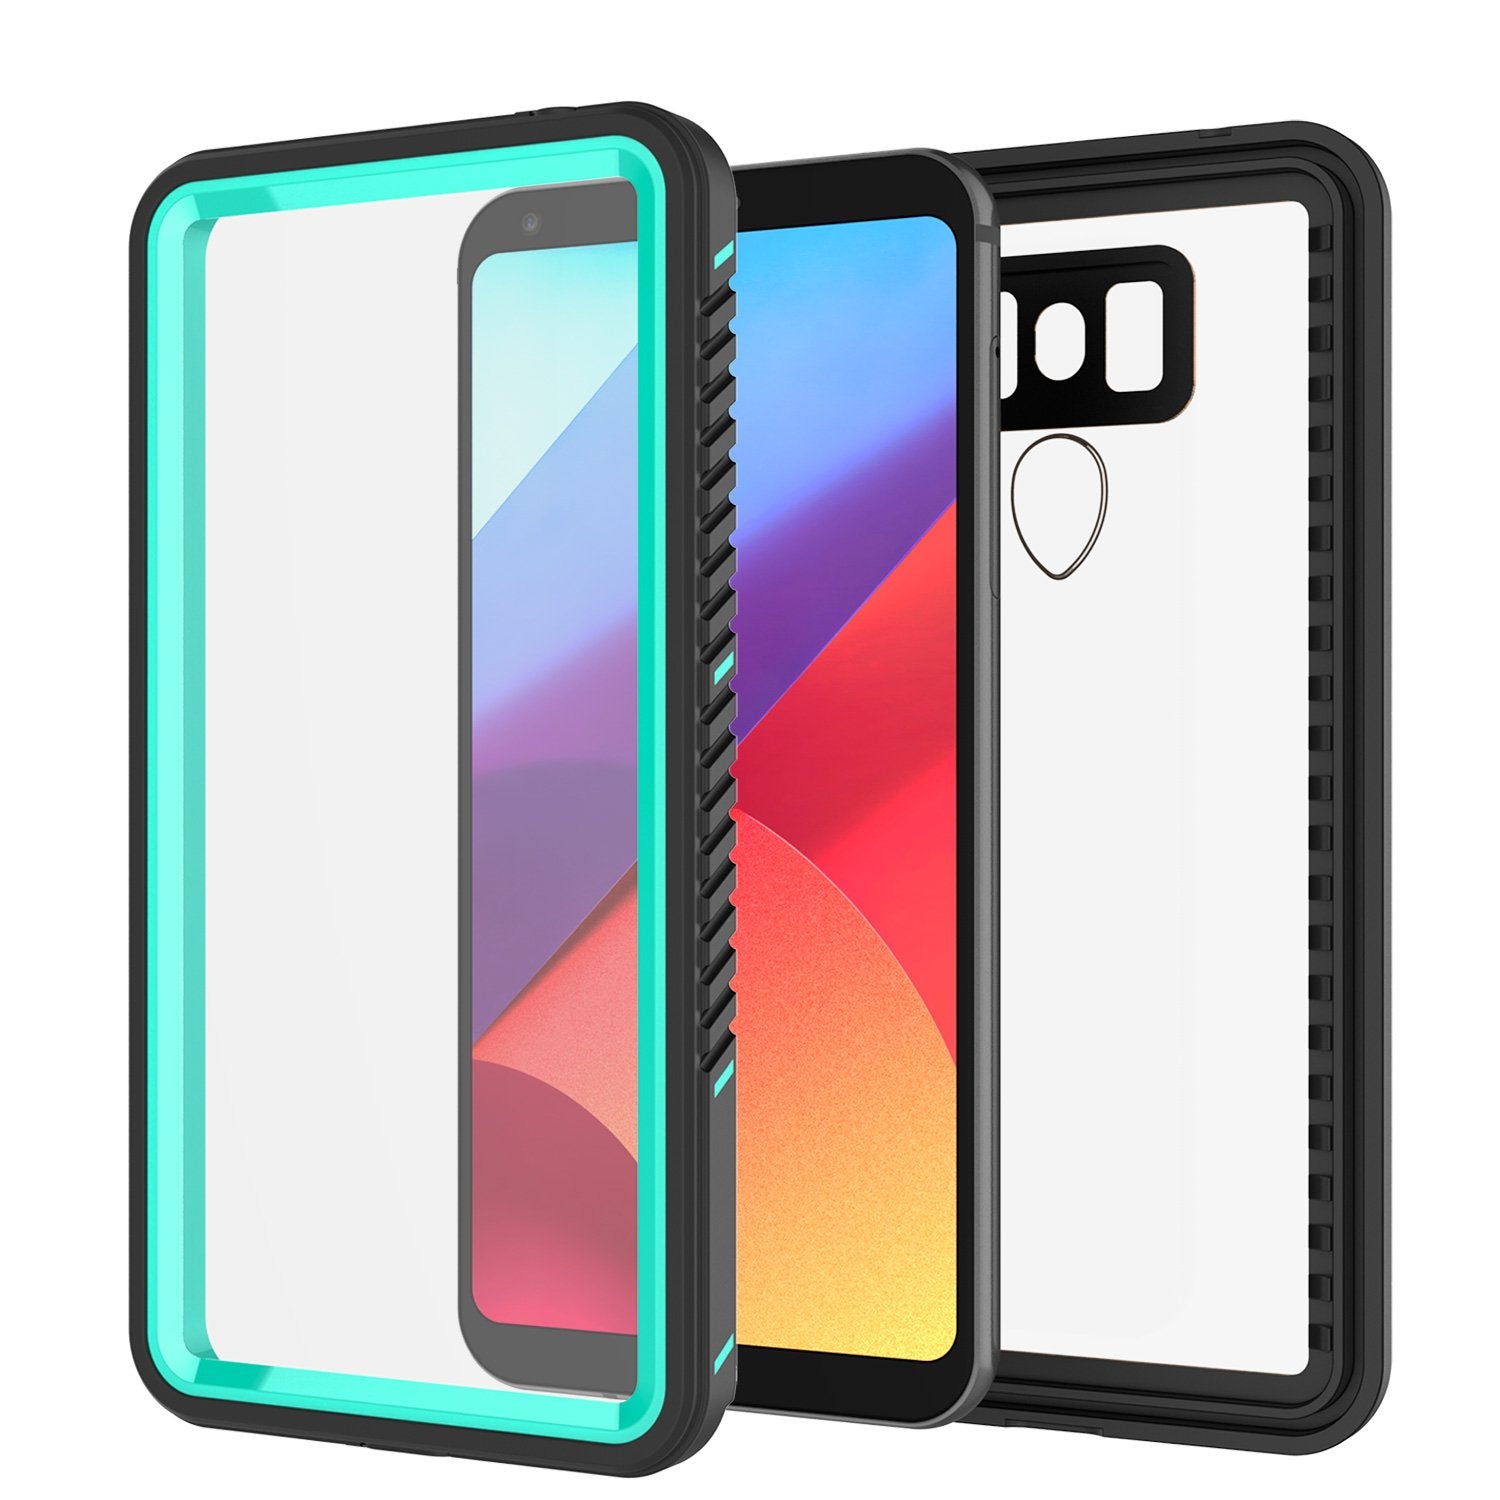 LG G6 Waterproof Case, Punkcase [Extreme Series] [Slim Fit] [IP68 Certified] [Shockproof] [Snowproof] [Dirproof] Armor Cover W/ Built In Screen Protector for LG G6 [TEAL] - PunkCase NZ